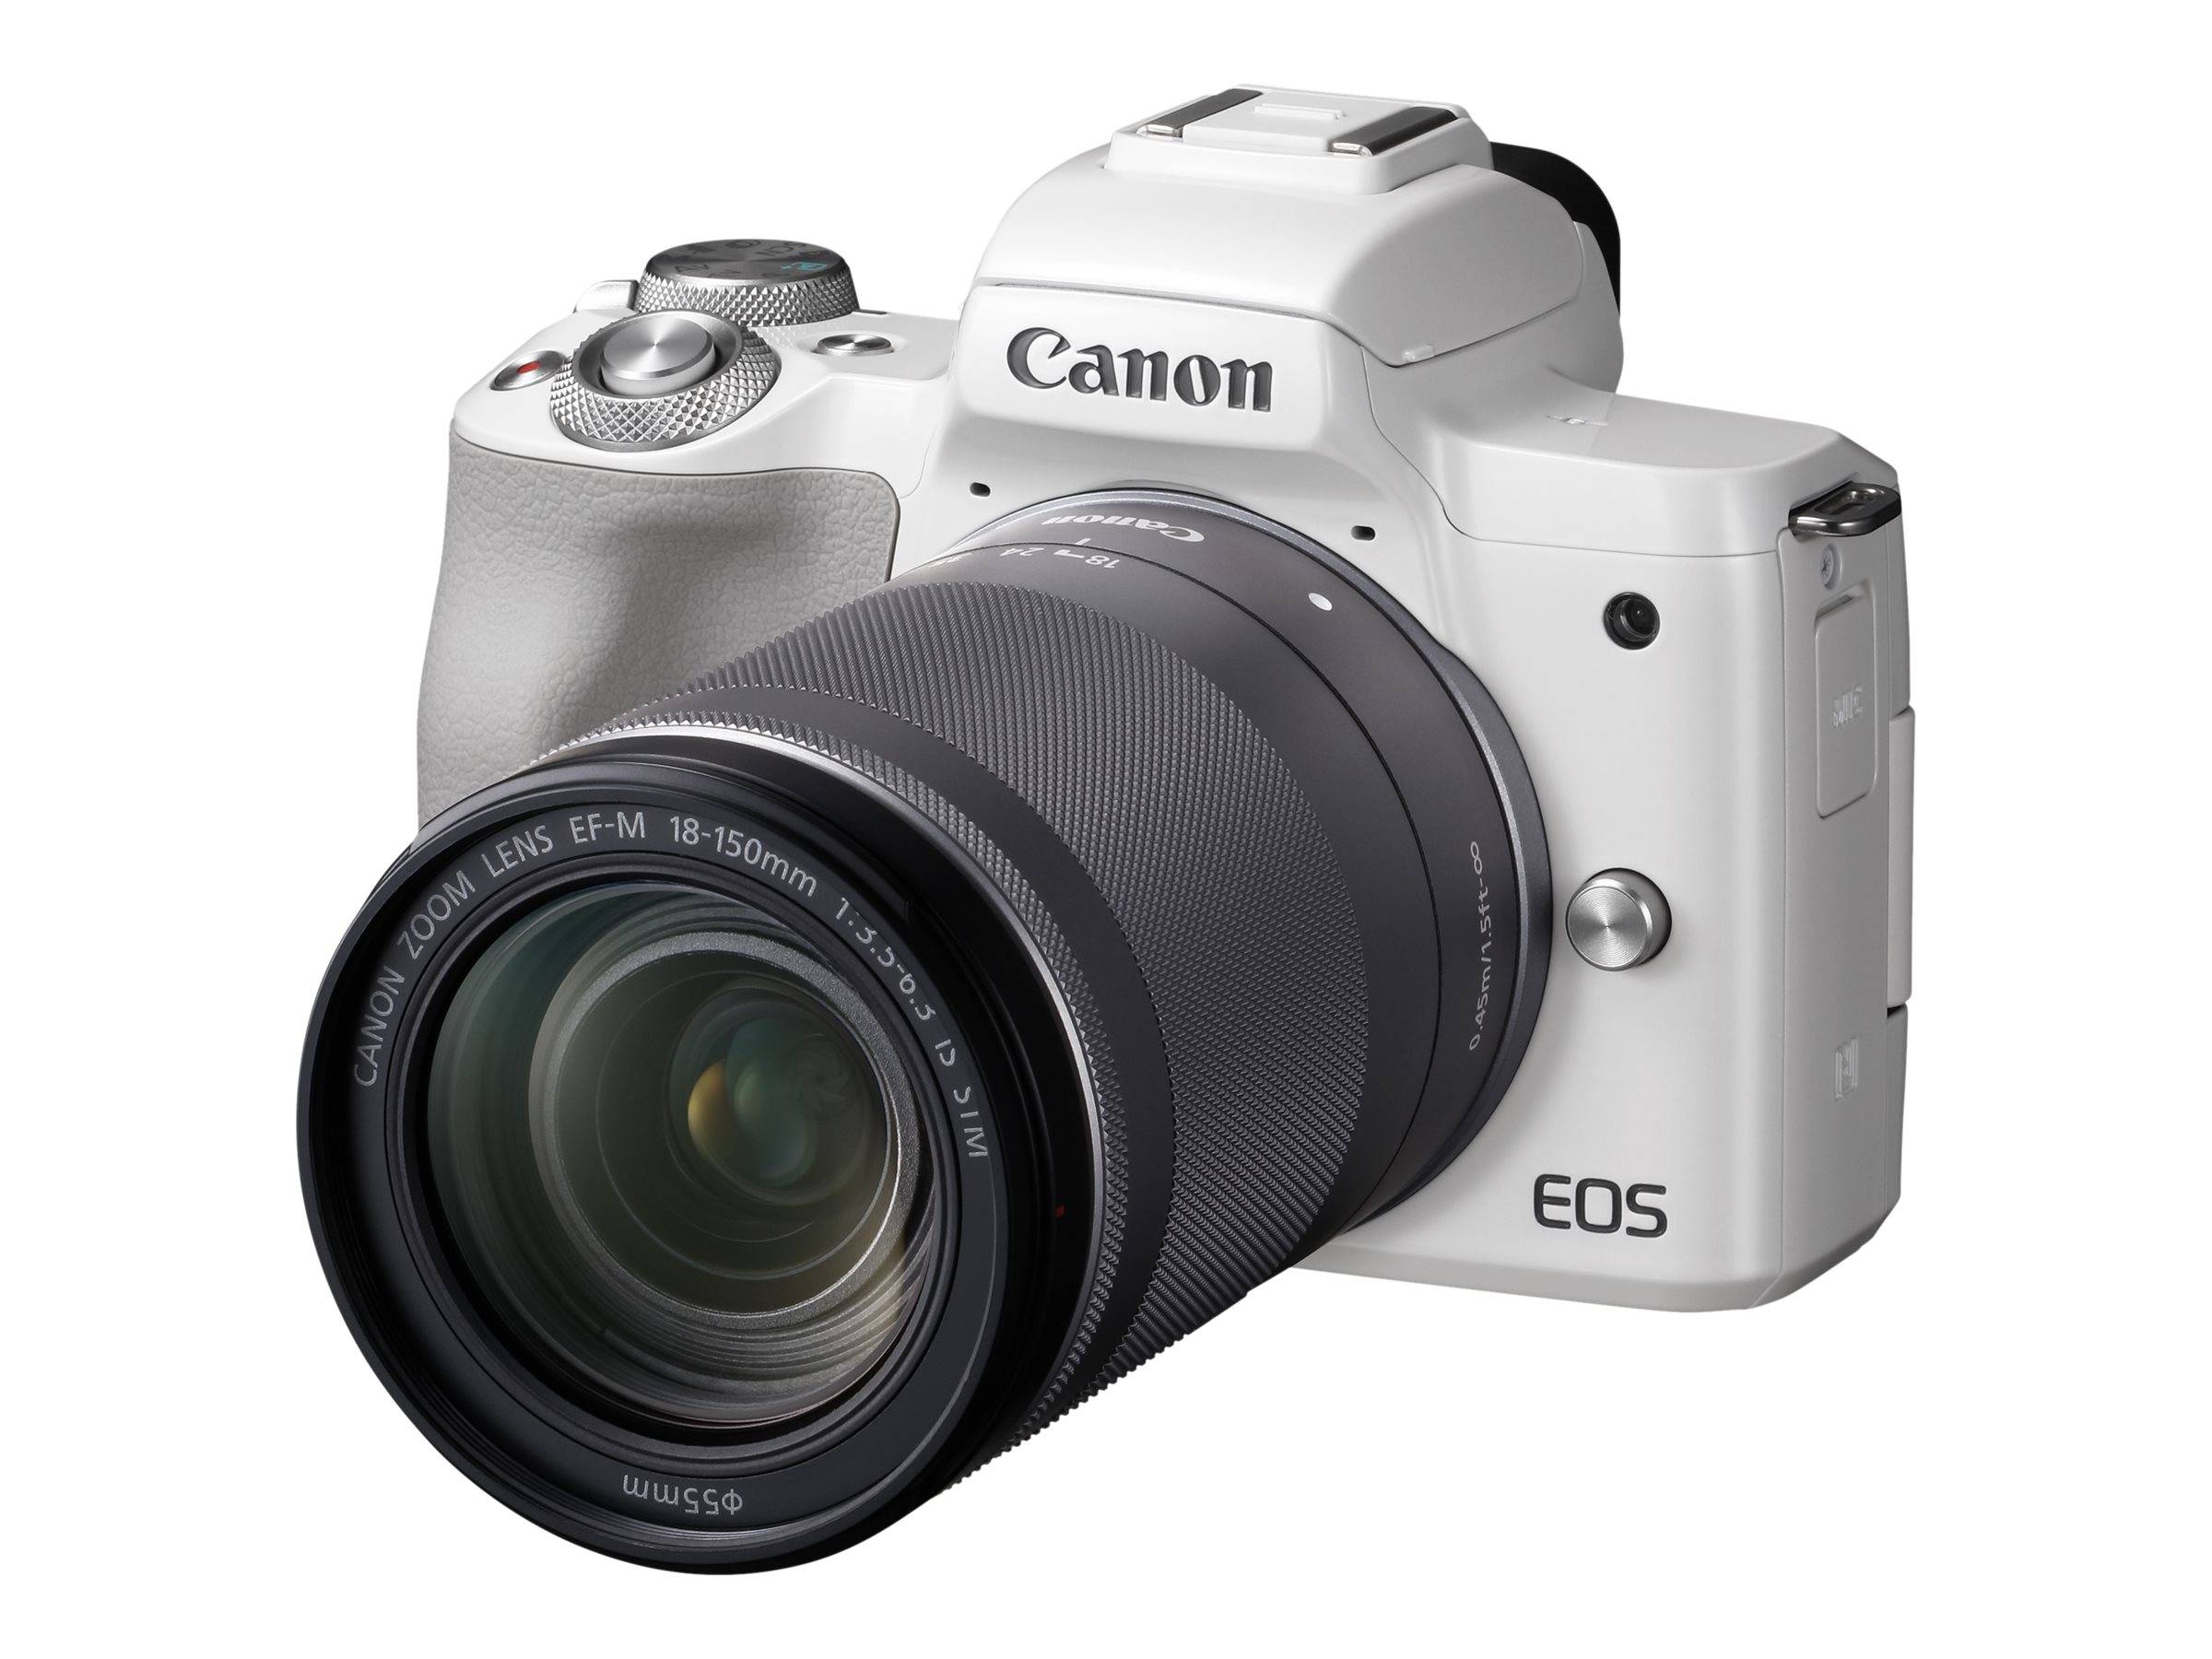 Canon фотоаппараты сервисный. Canon EOS m50 Mark II. Canon EOS m50 Kit. Canon m50 White. Canon EOS m50 Kit 18-150 is STM White.